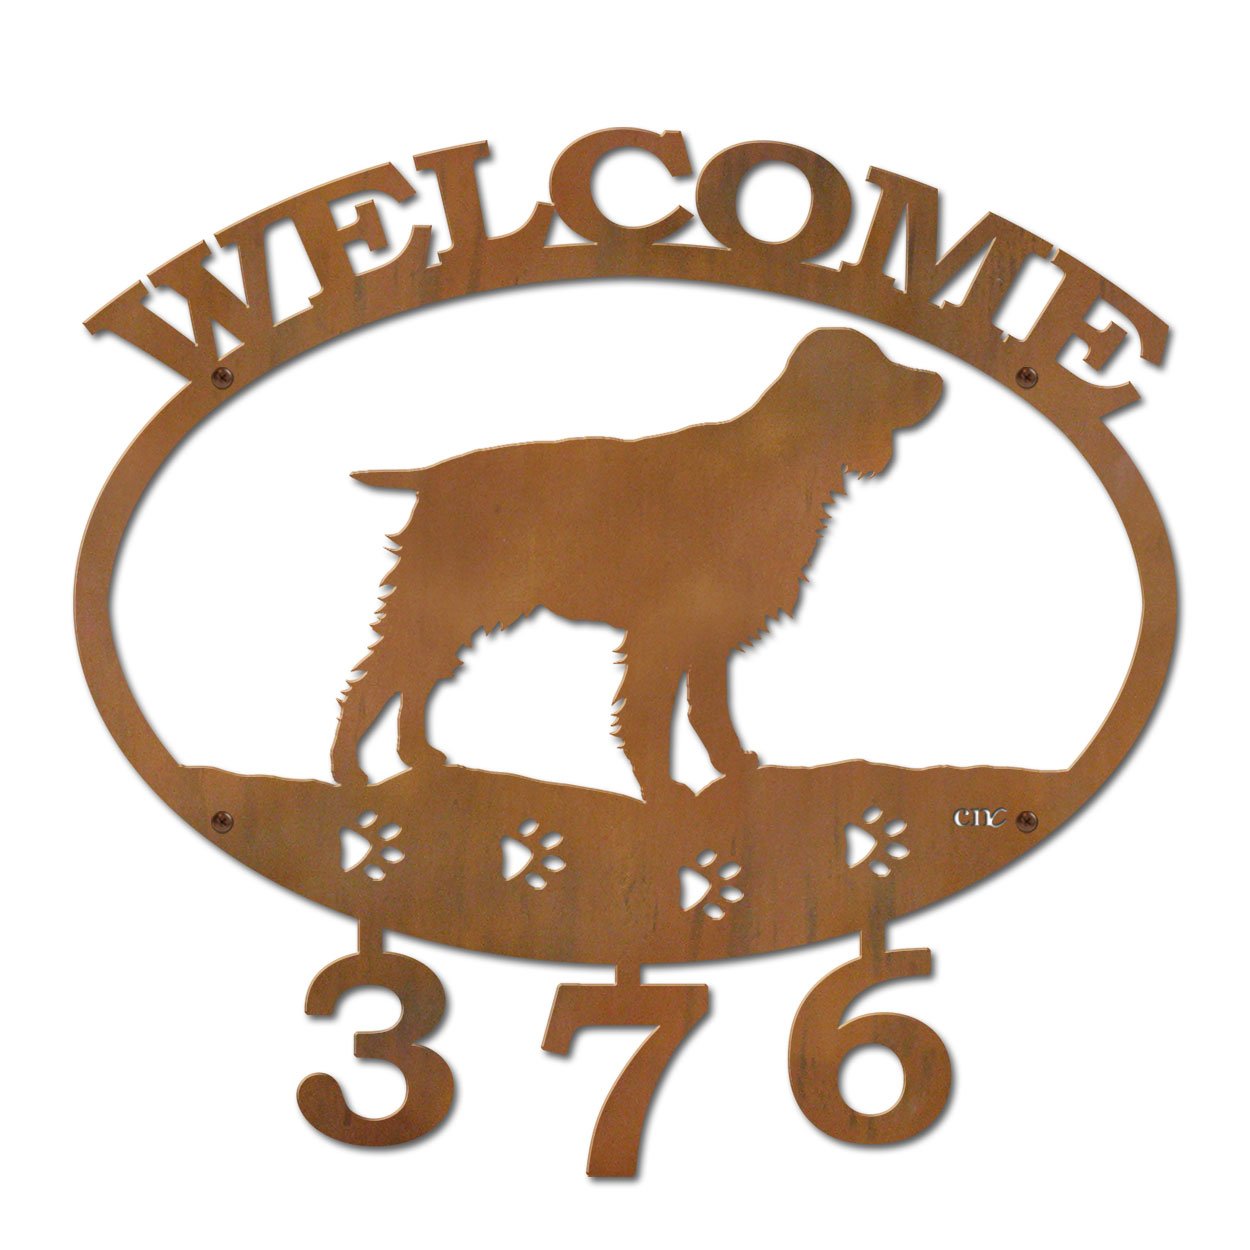 601344 - English Springer Spaniel Welcome Custom House Numbers